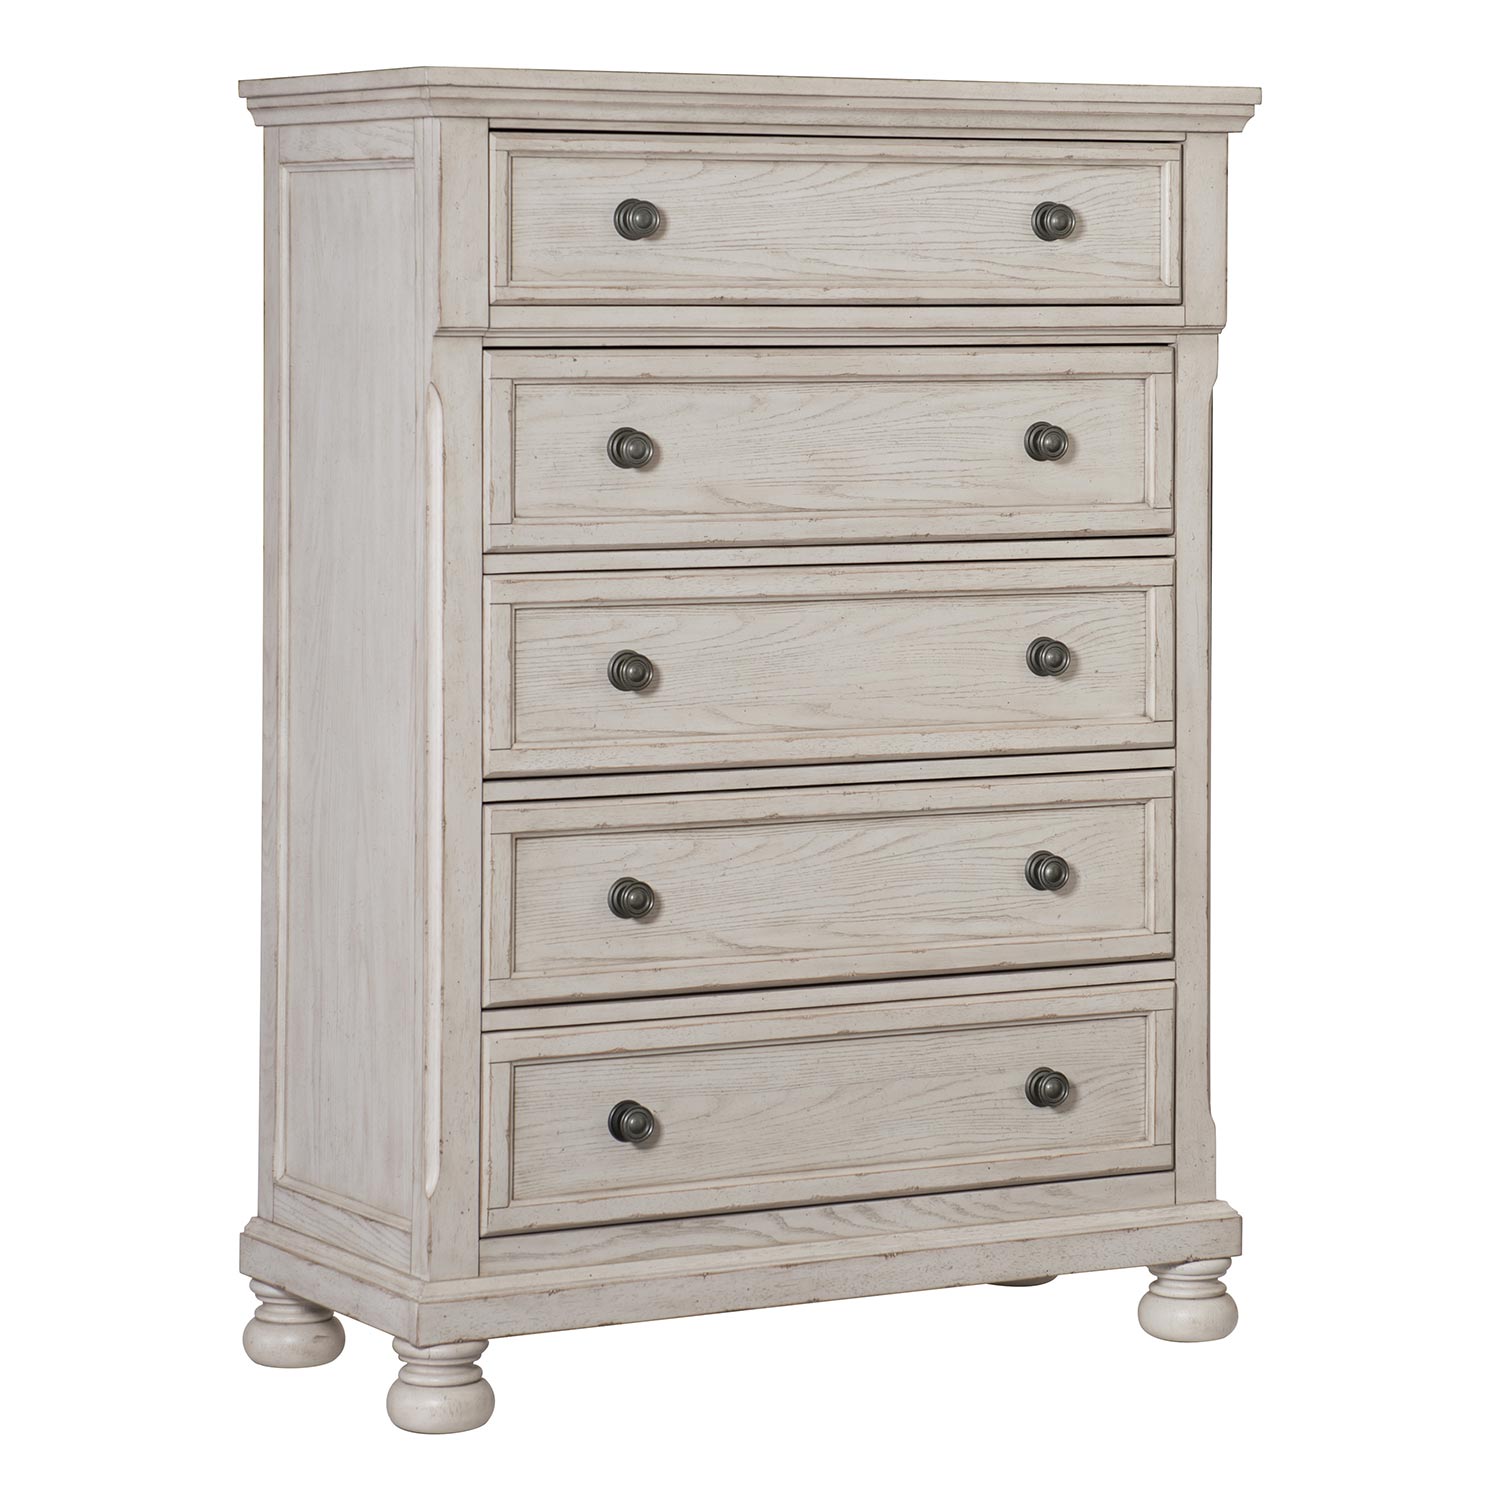 Homelegance Bethel Chest - Wire-brushed White